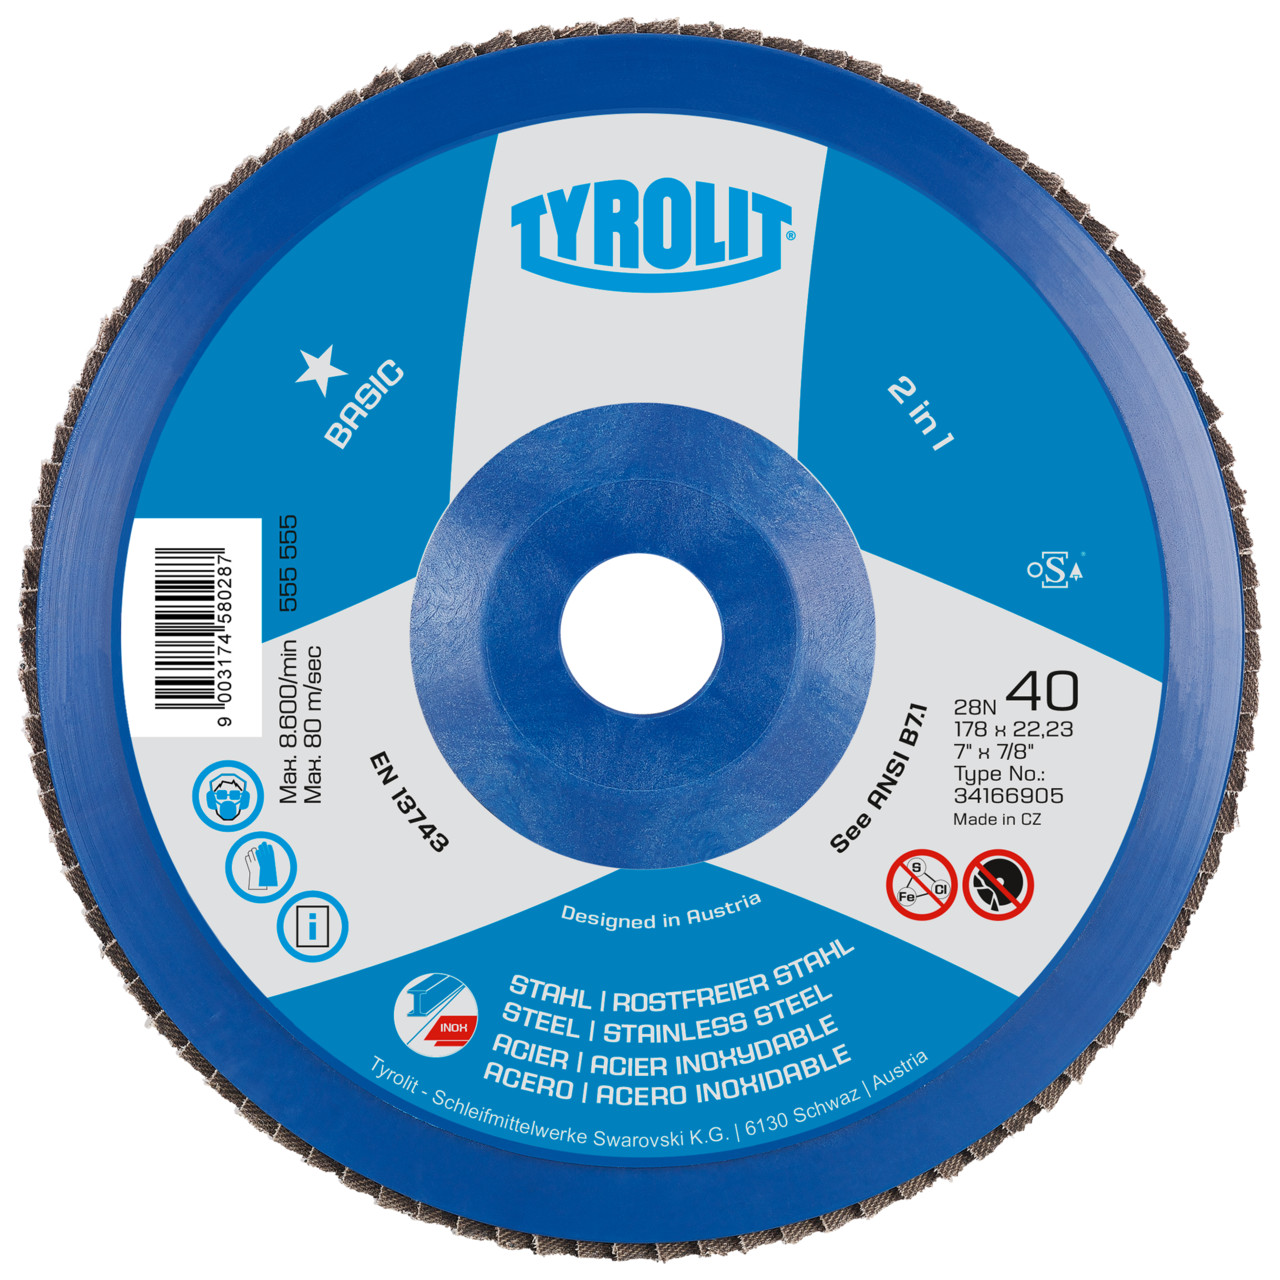 Tyrolit Serrated lock washer DxH 125x22.23 2in1 for steel &amp; stainless steel, P40, shape: 28N - straight version (plastic carrier body), Art. 34318572